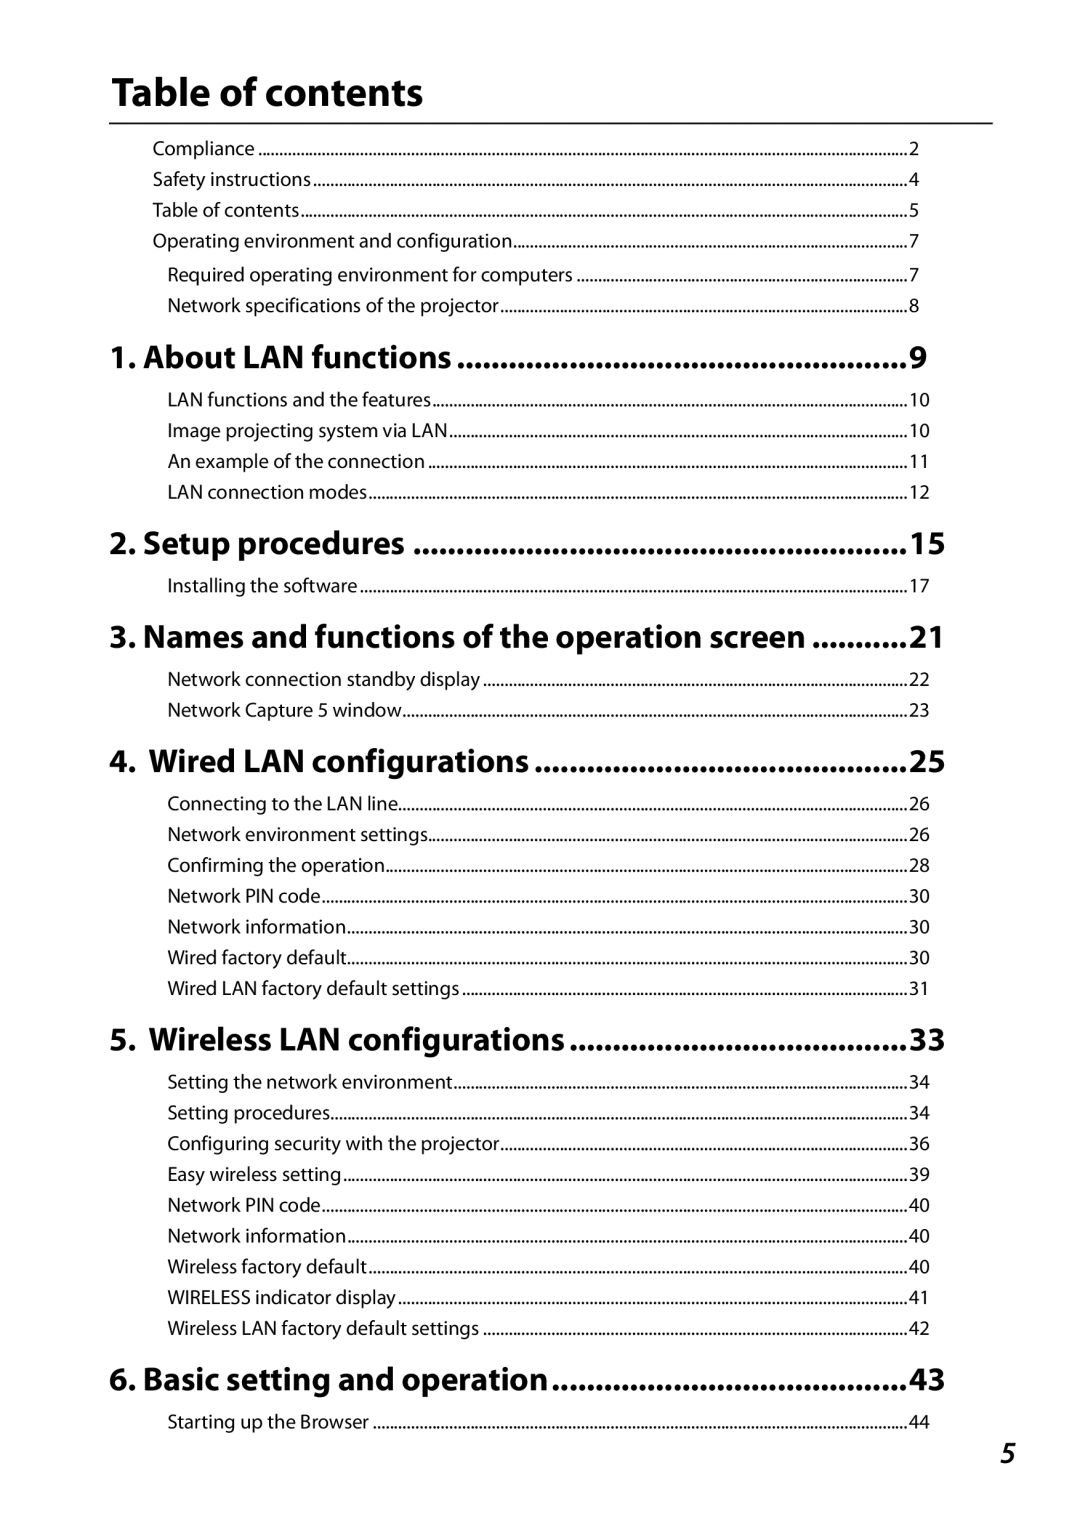 Sanyo PLCXL51 Table of contents, About LAN functions, Setup procedures, Names and functions of the operation screen 